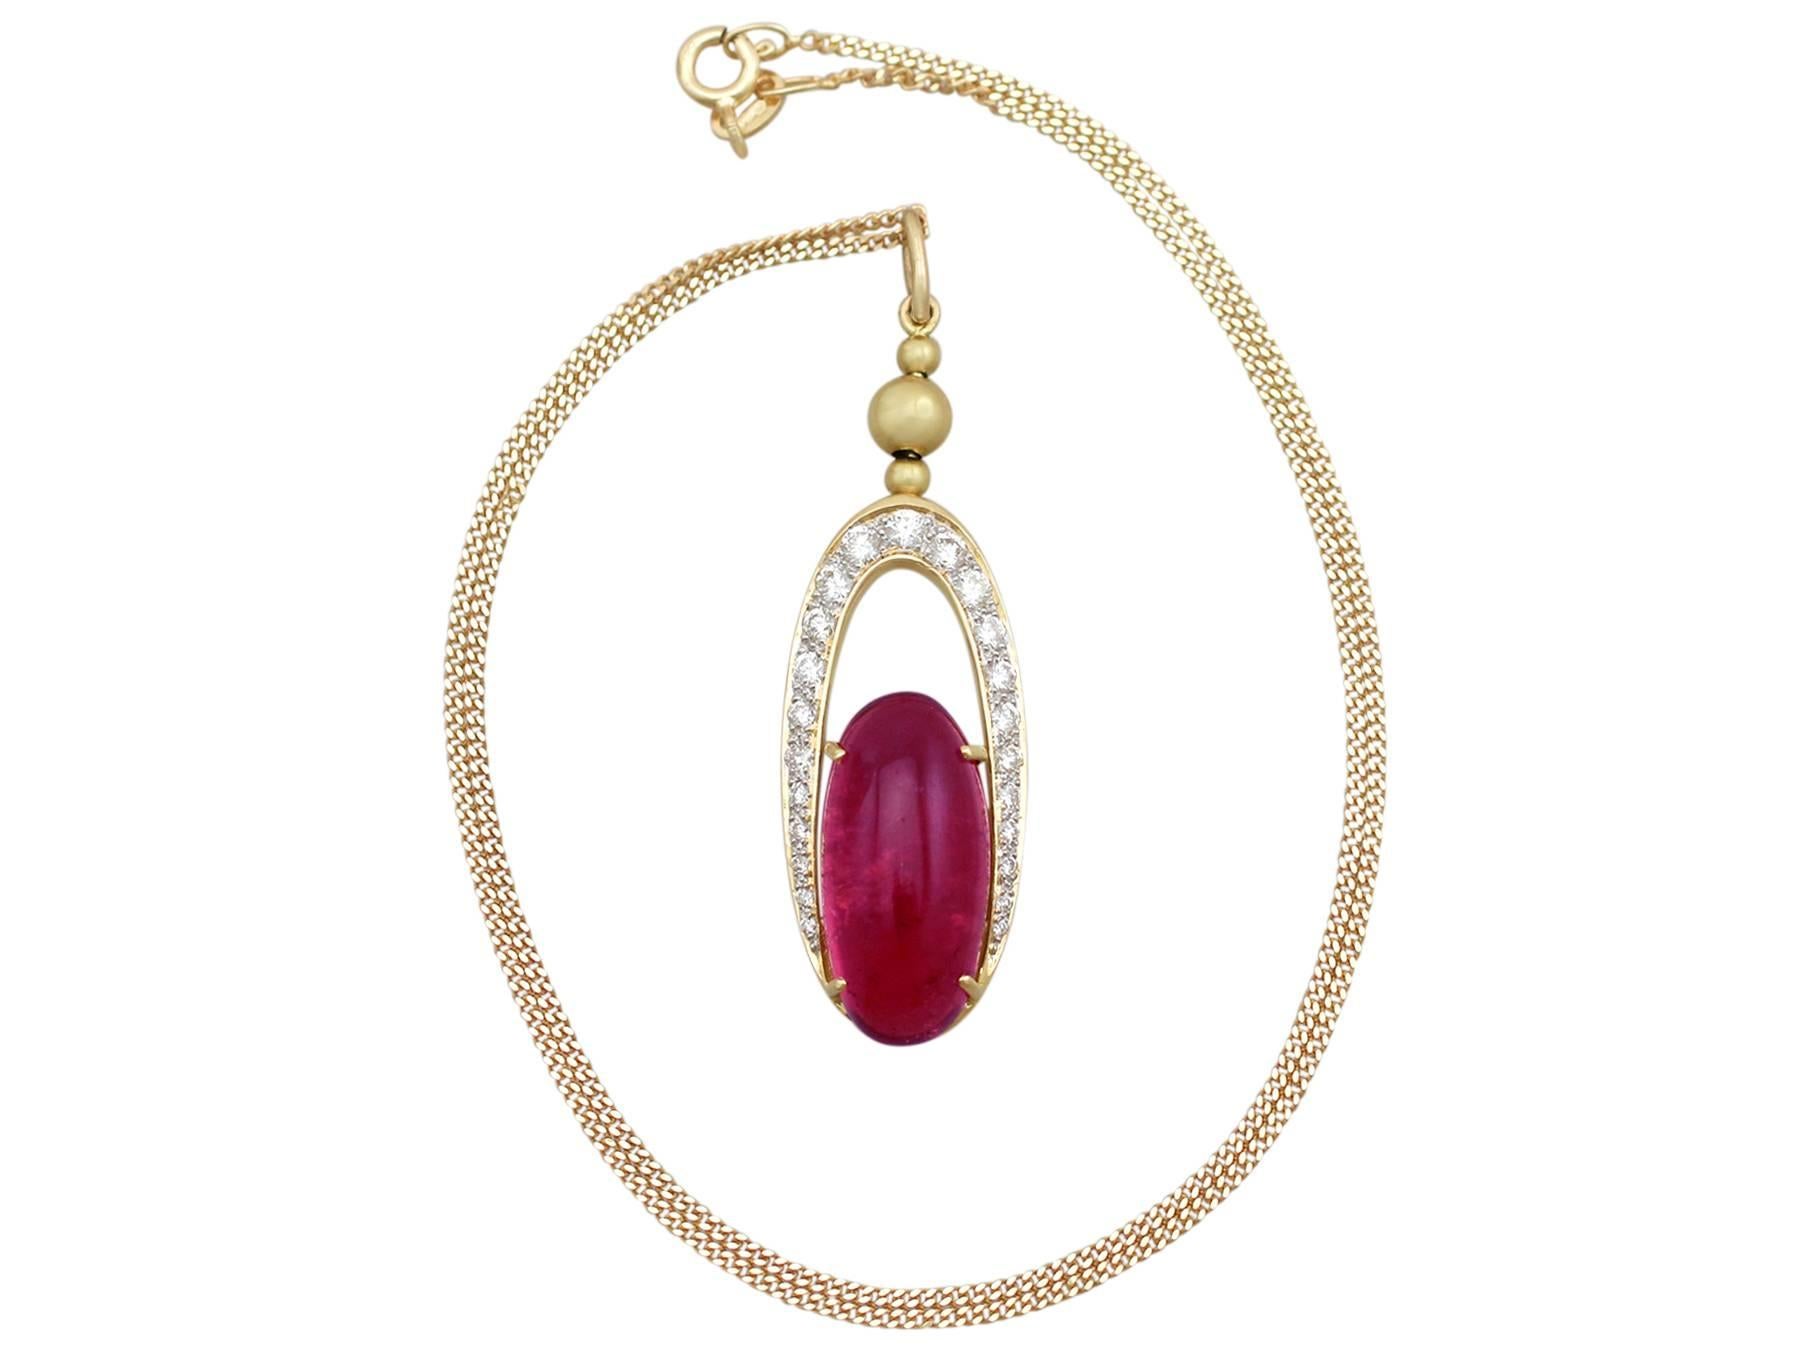 A stunning 9.36 carat pink tourmaline and 0.60 carat diamond, 18 karat yellow gold and 18 karat white gold set pendant; part of our diverse gemstone jewelry collections.

This stunning, fine and impressive gold cabochon cut tourmaline pendant has